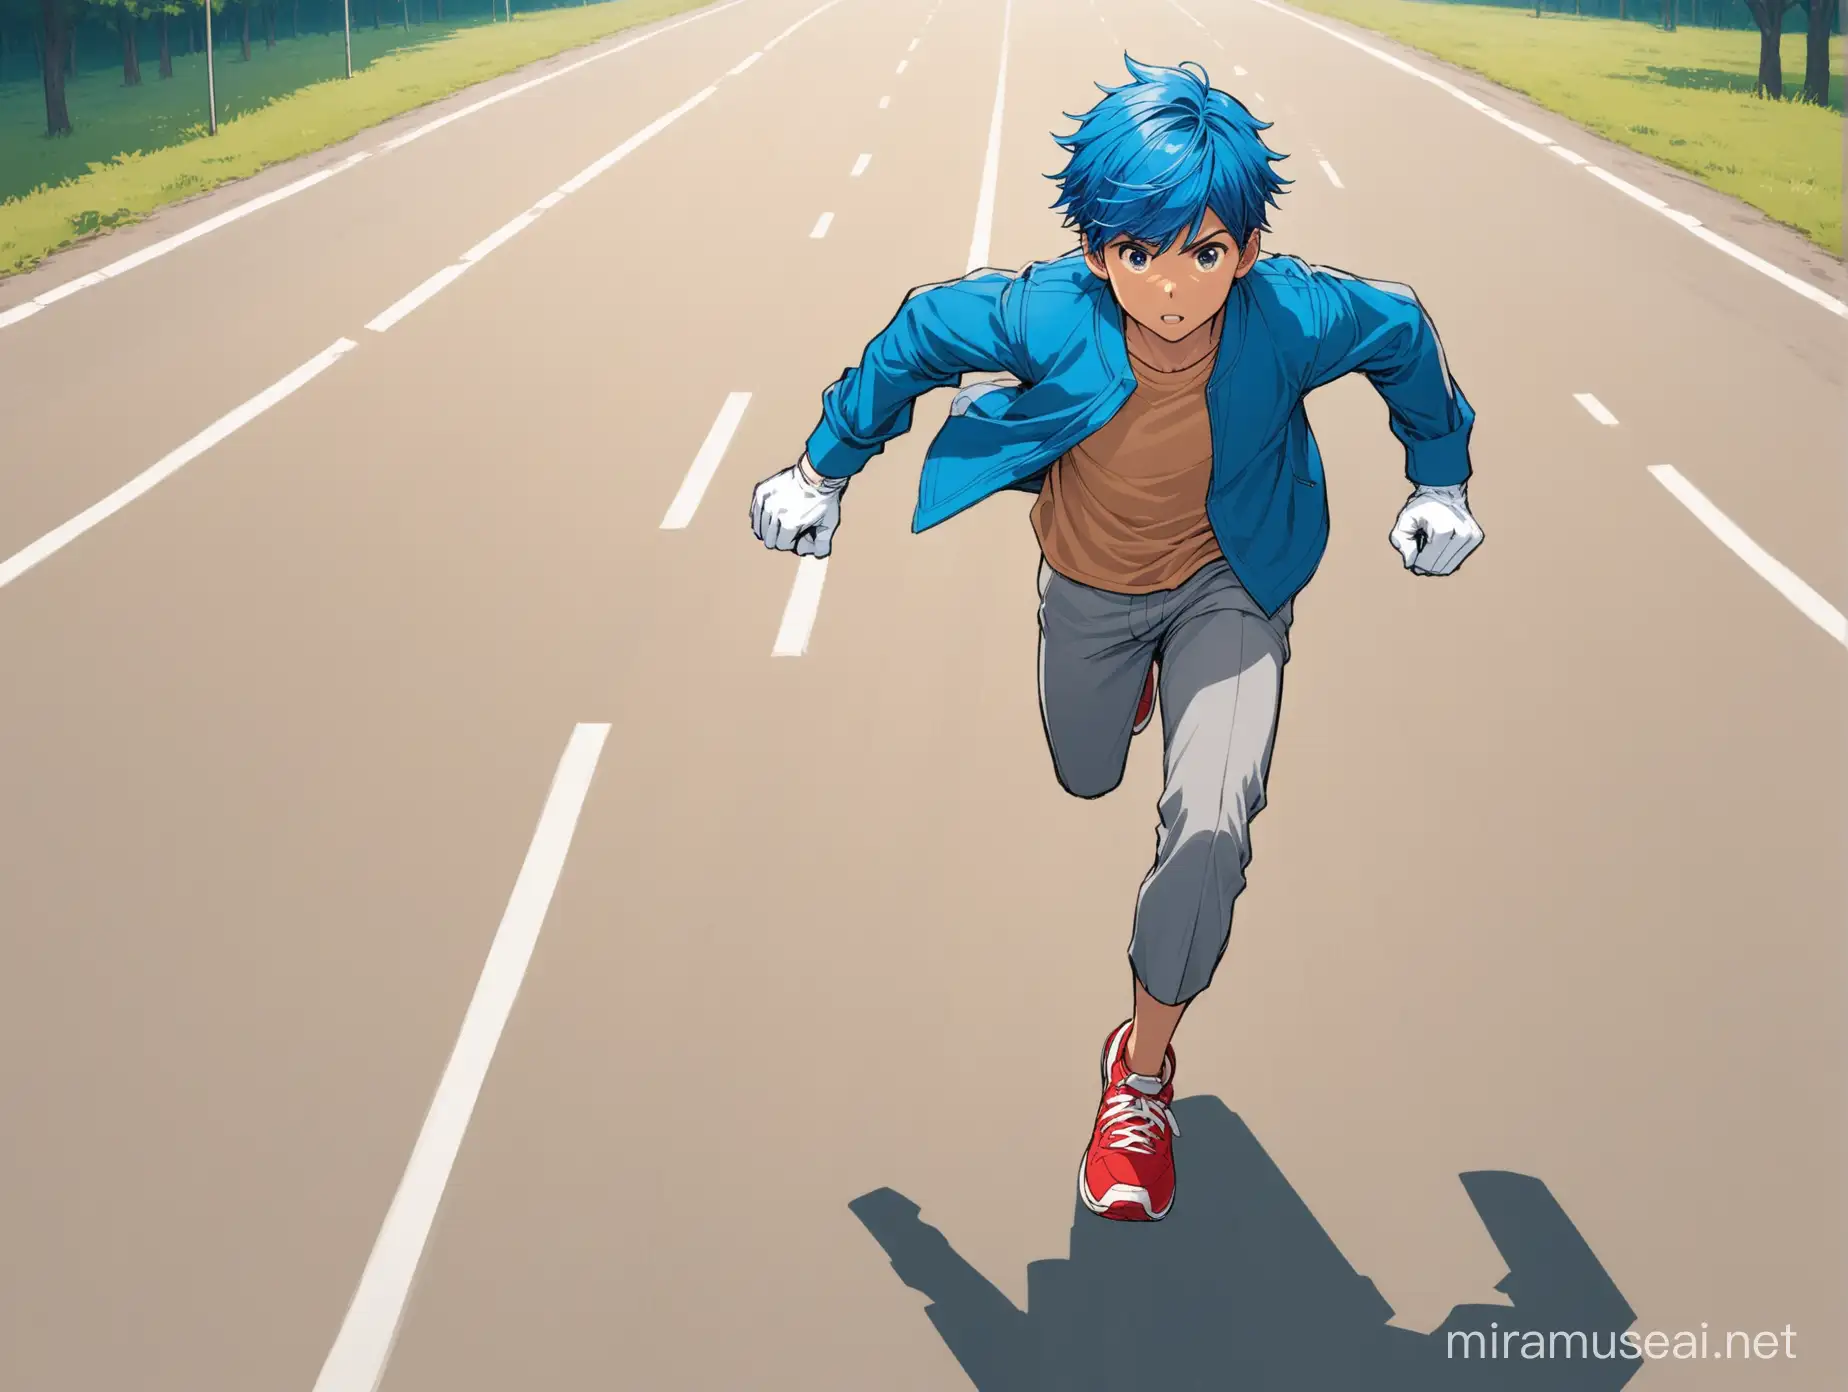 Energetic Boy with Blue Fringe Hair Running on Road